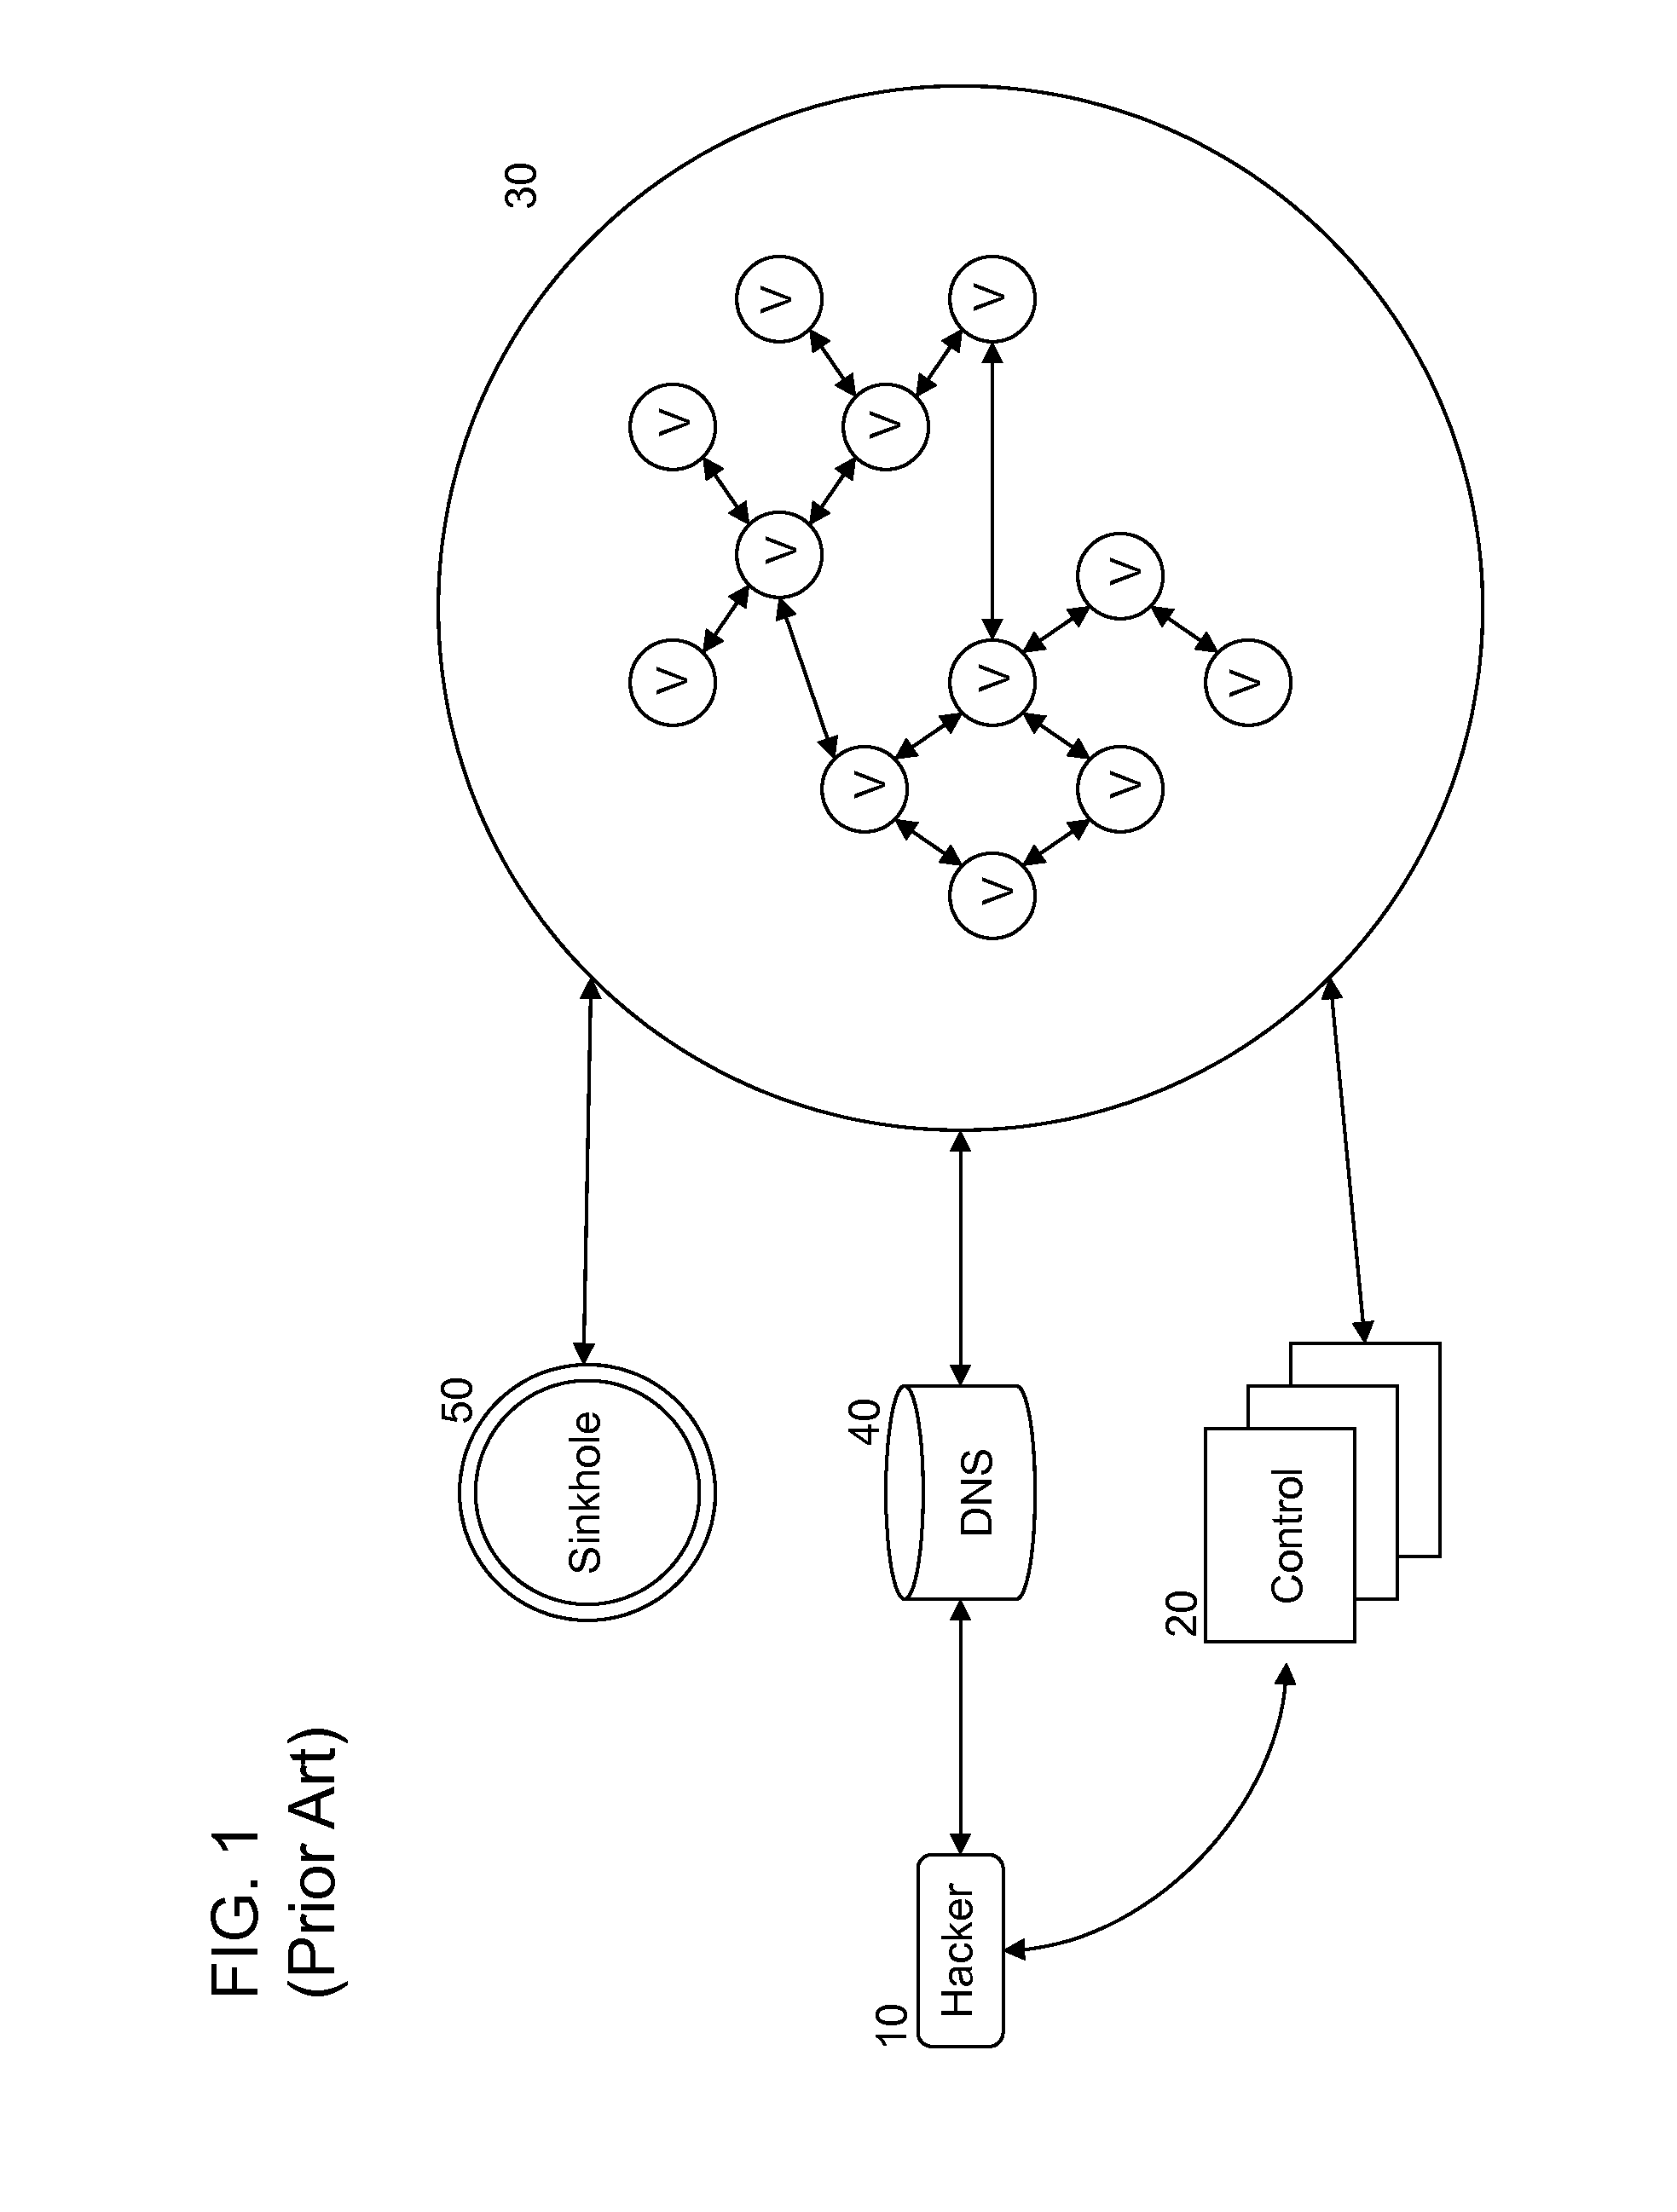 Method and system for detecting network compromise